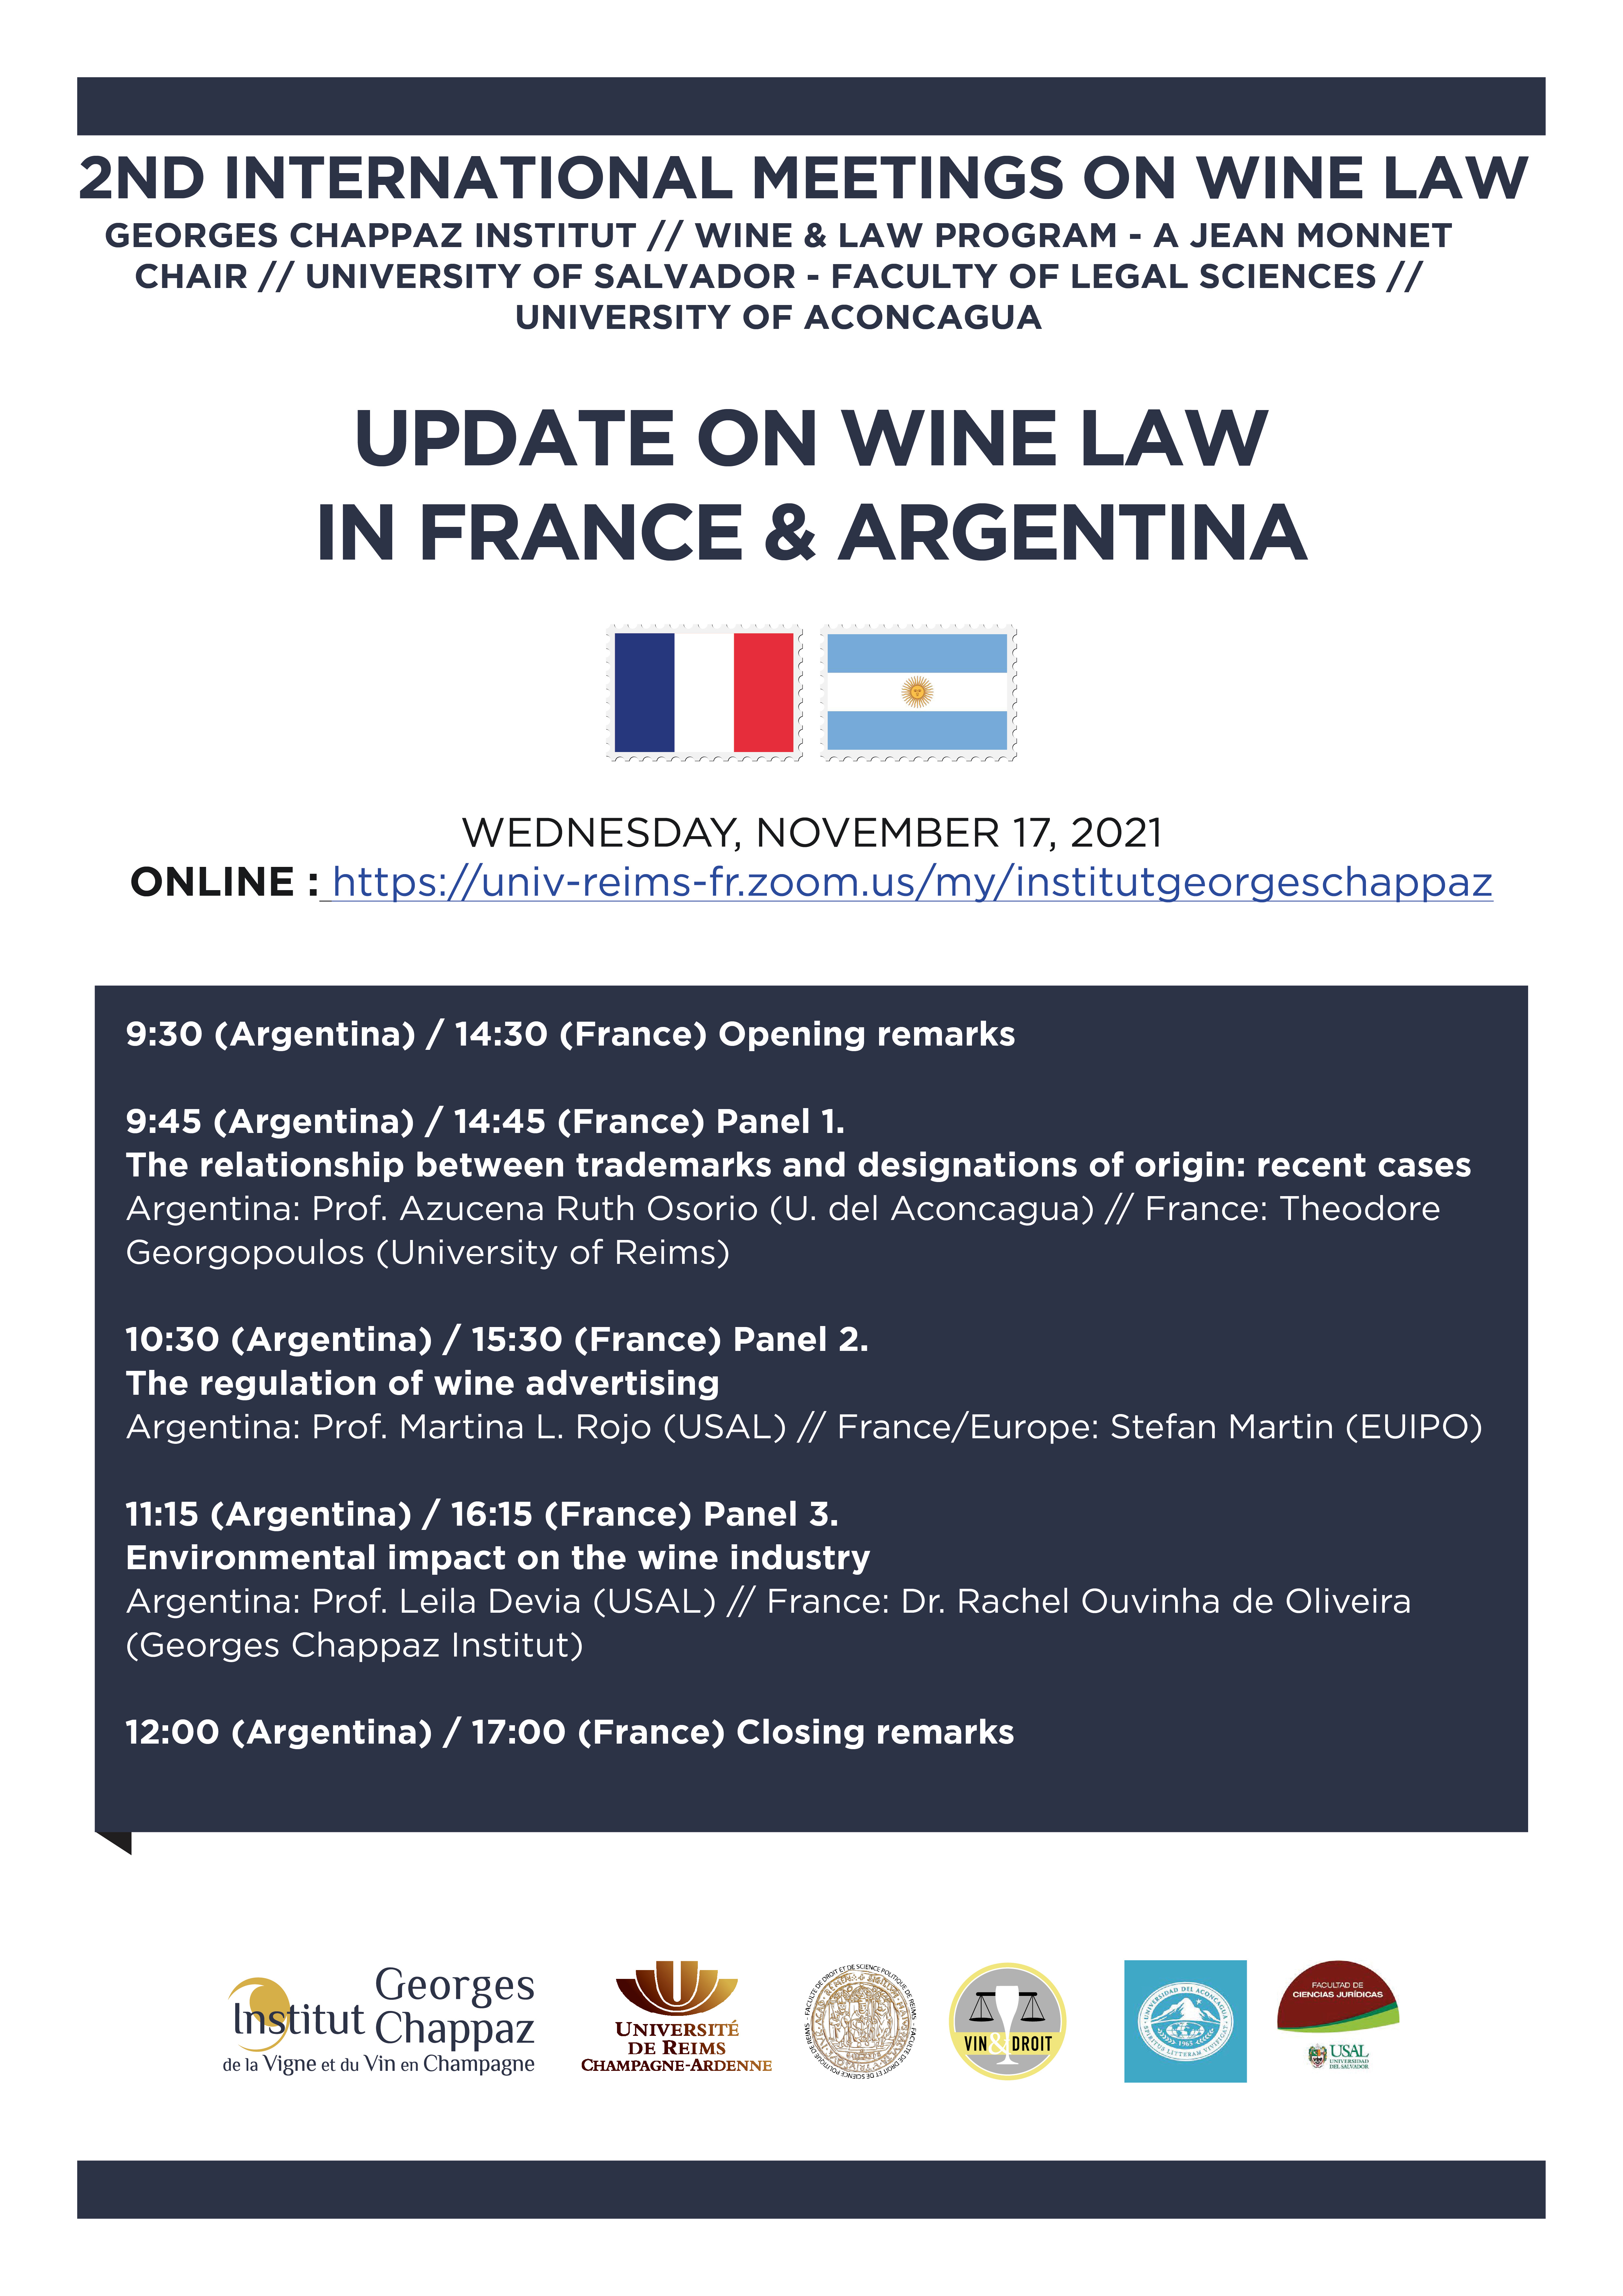 Update on Wine Law in France & Argentina